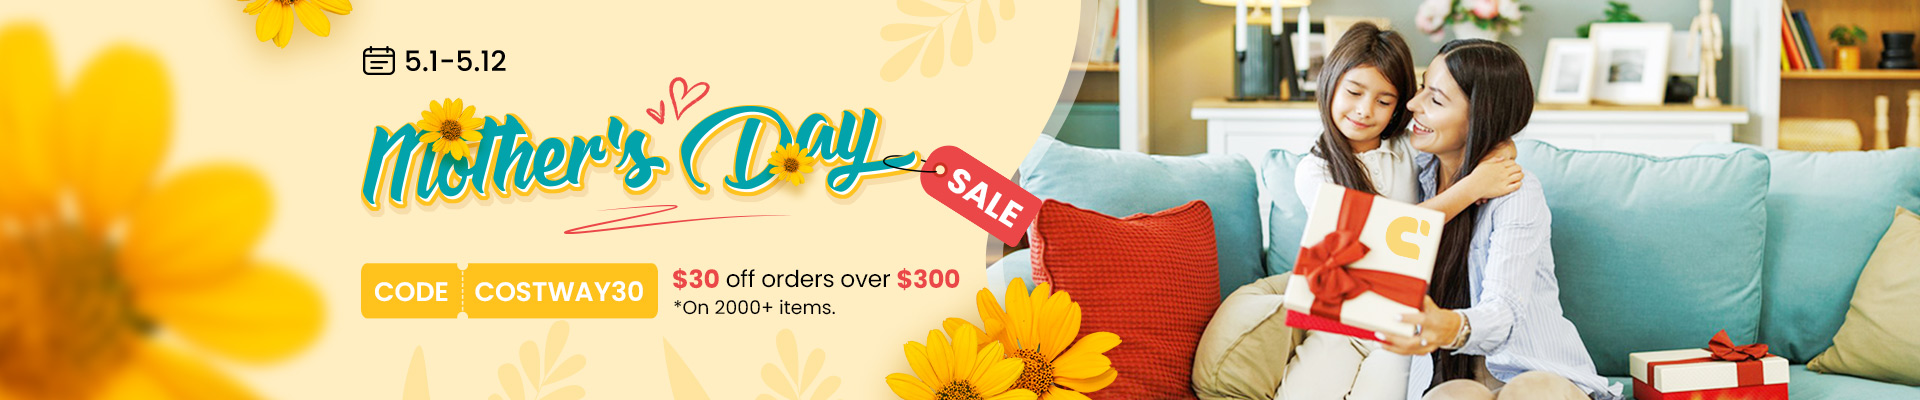 Costway - Mother’s Day Sales: $30 off orders with Code!